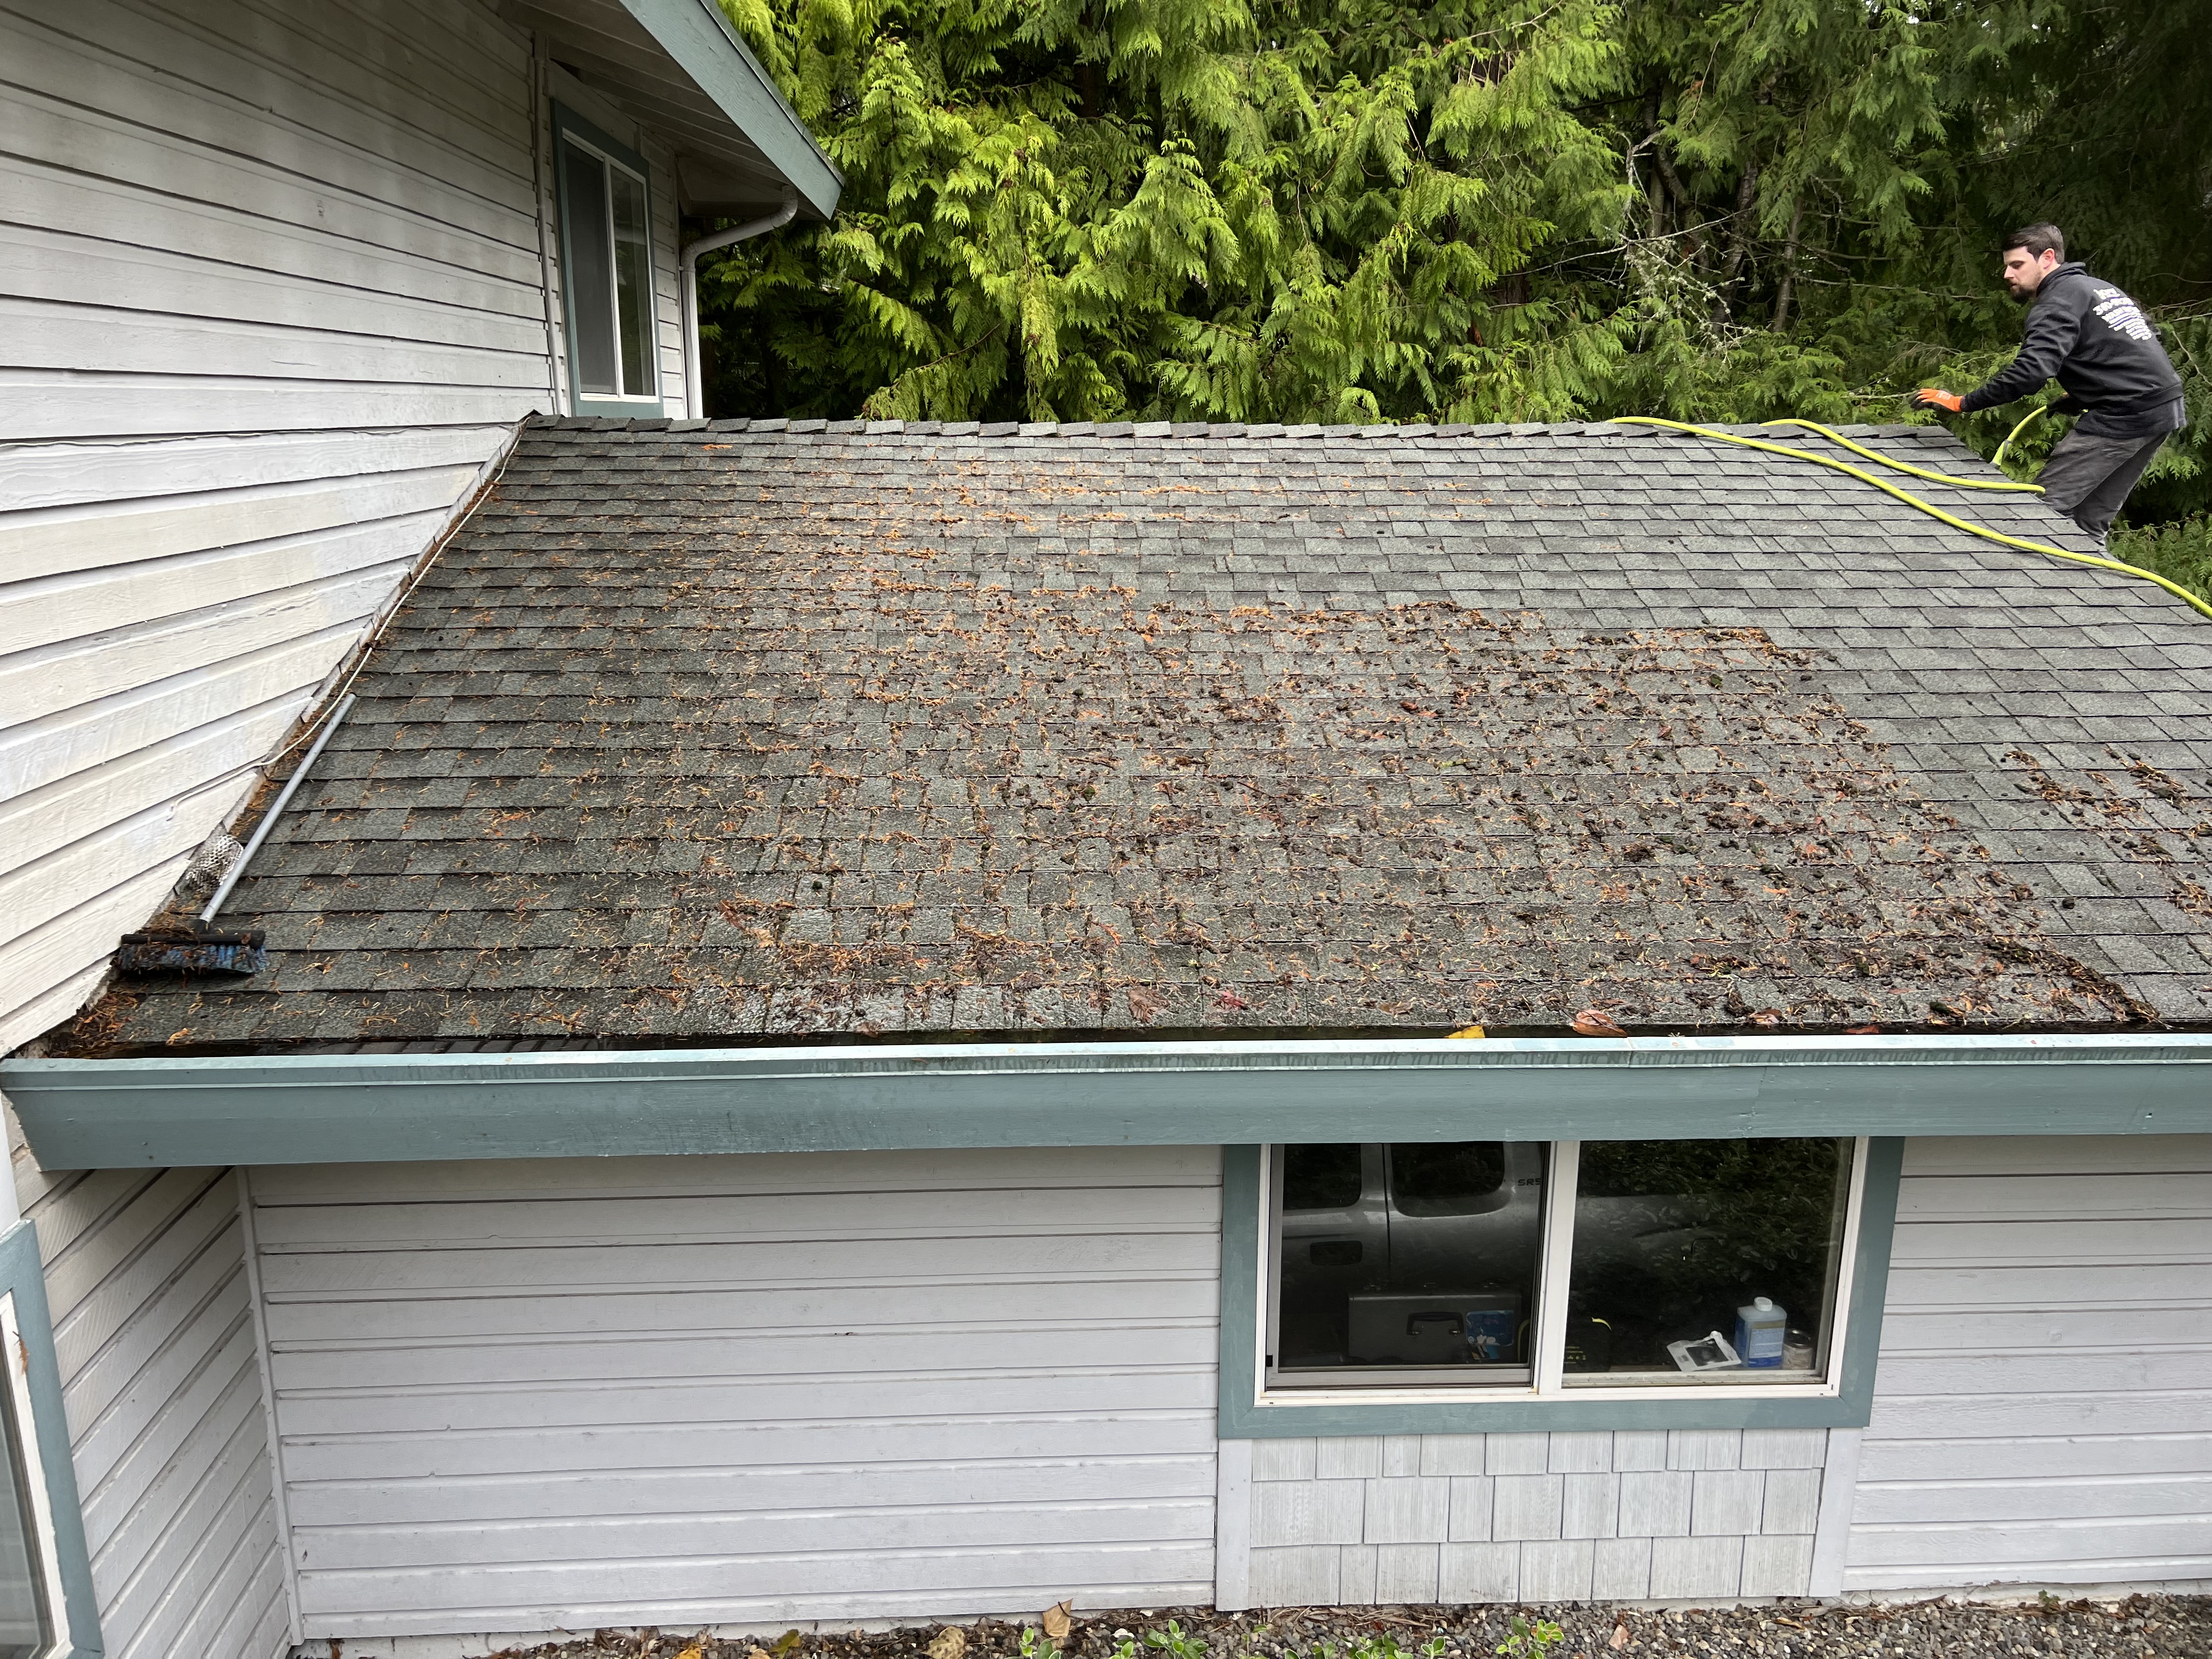 Top Quality Roof Moss Treatment and Gutter Cleaning in Lakewood, WA